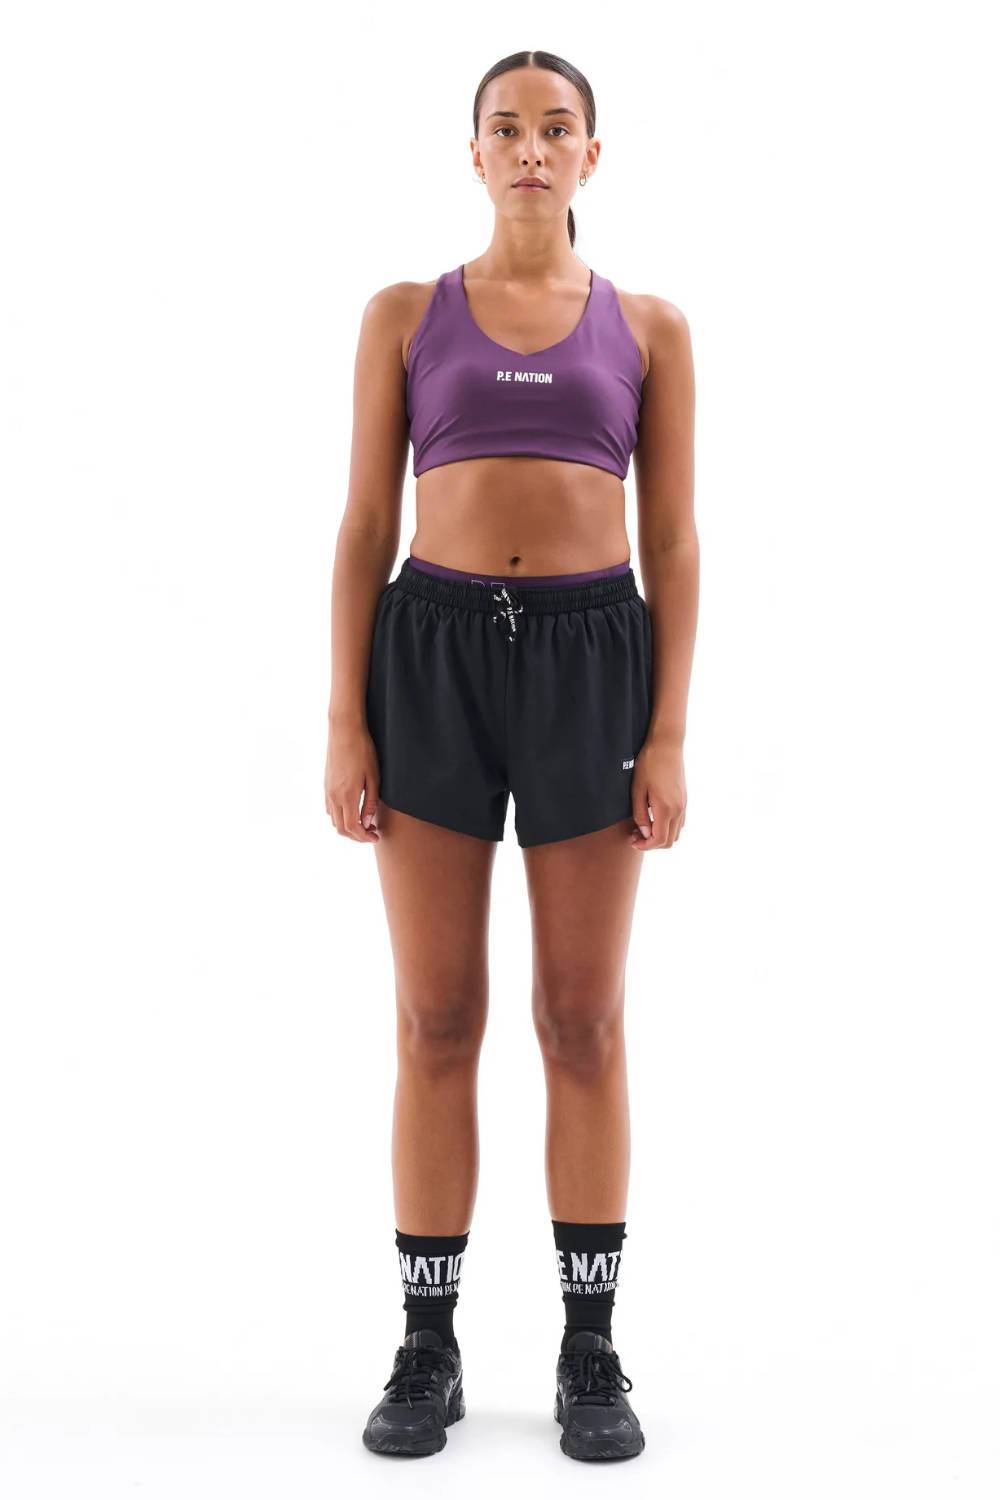 pe nation recycled activewear